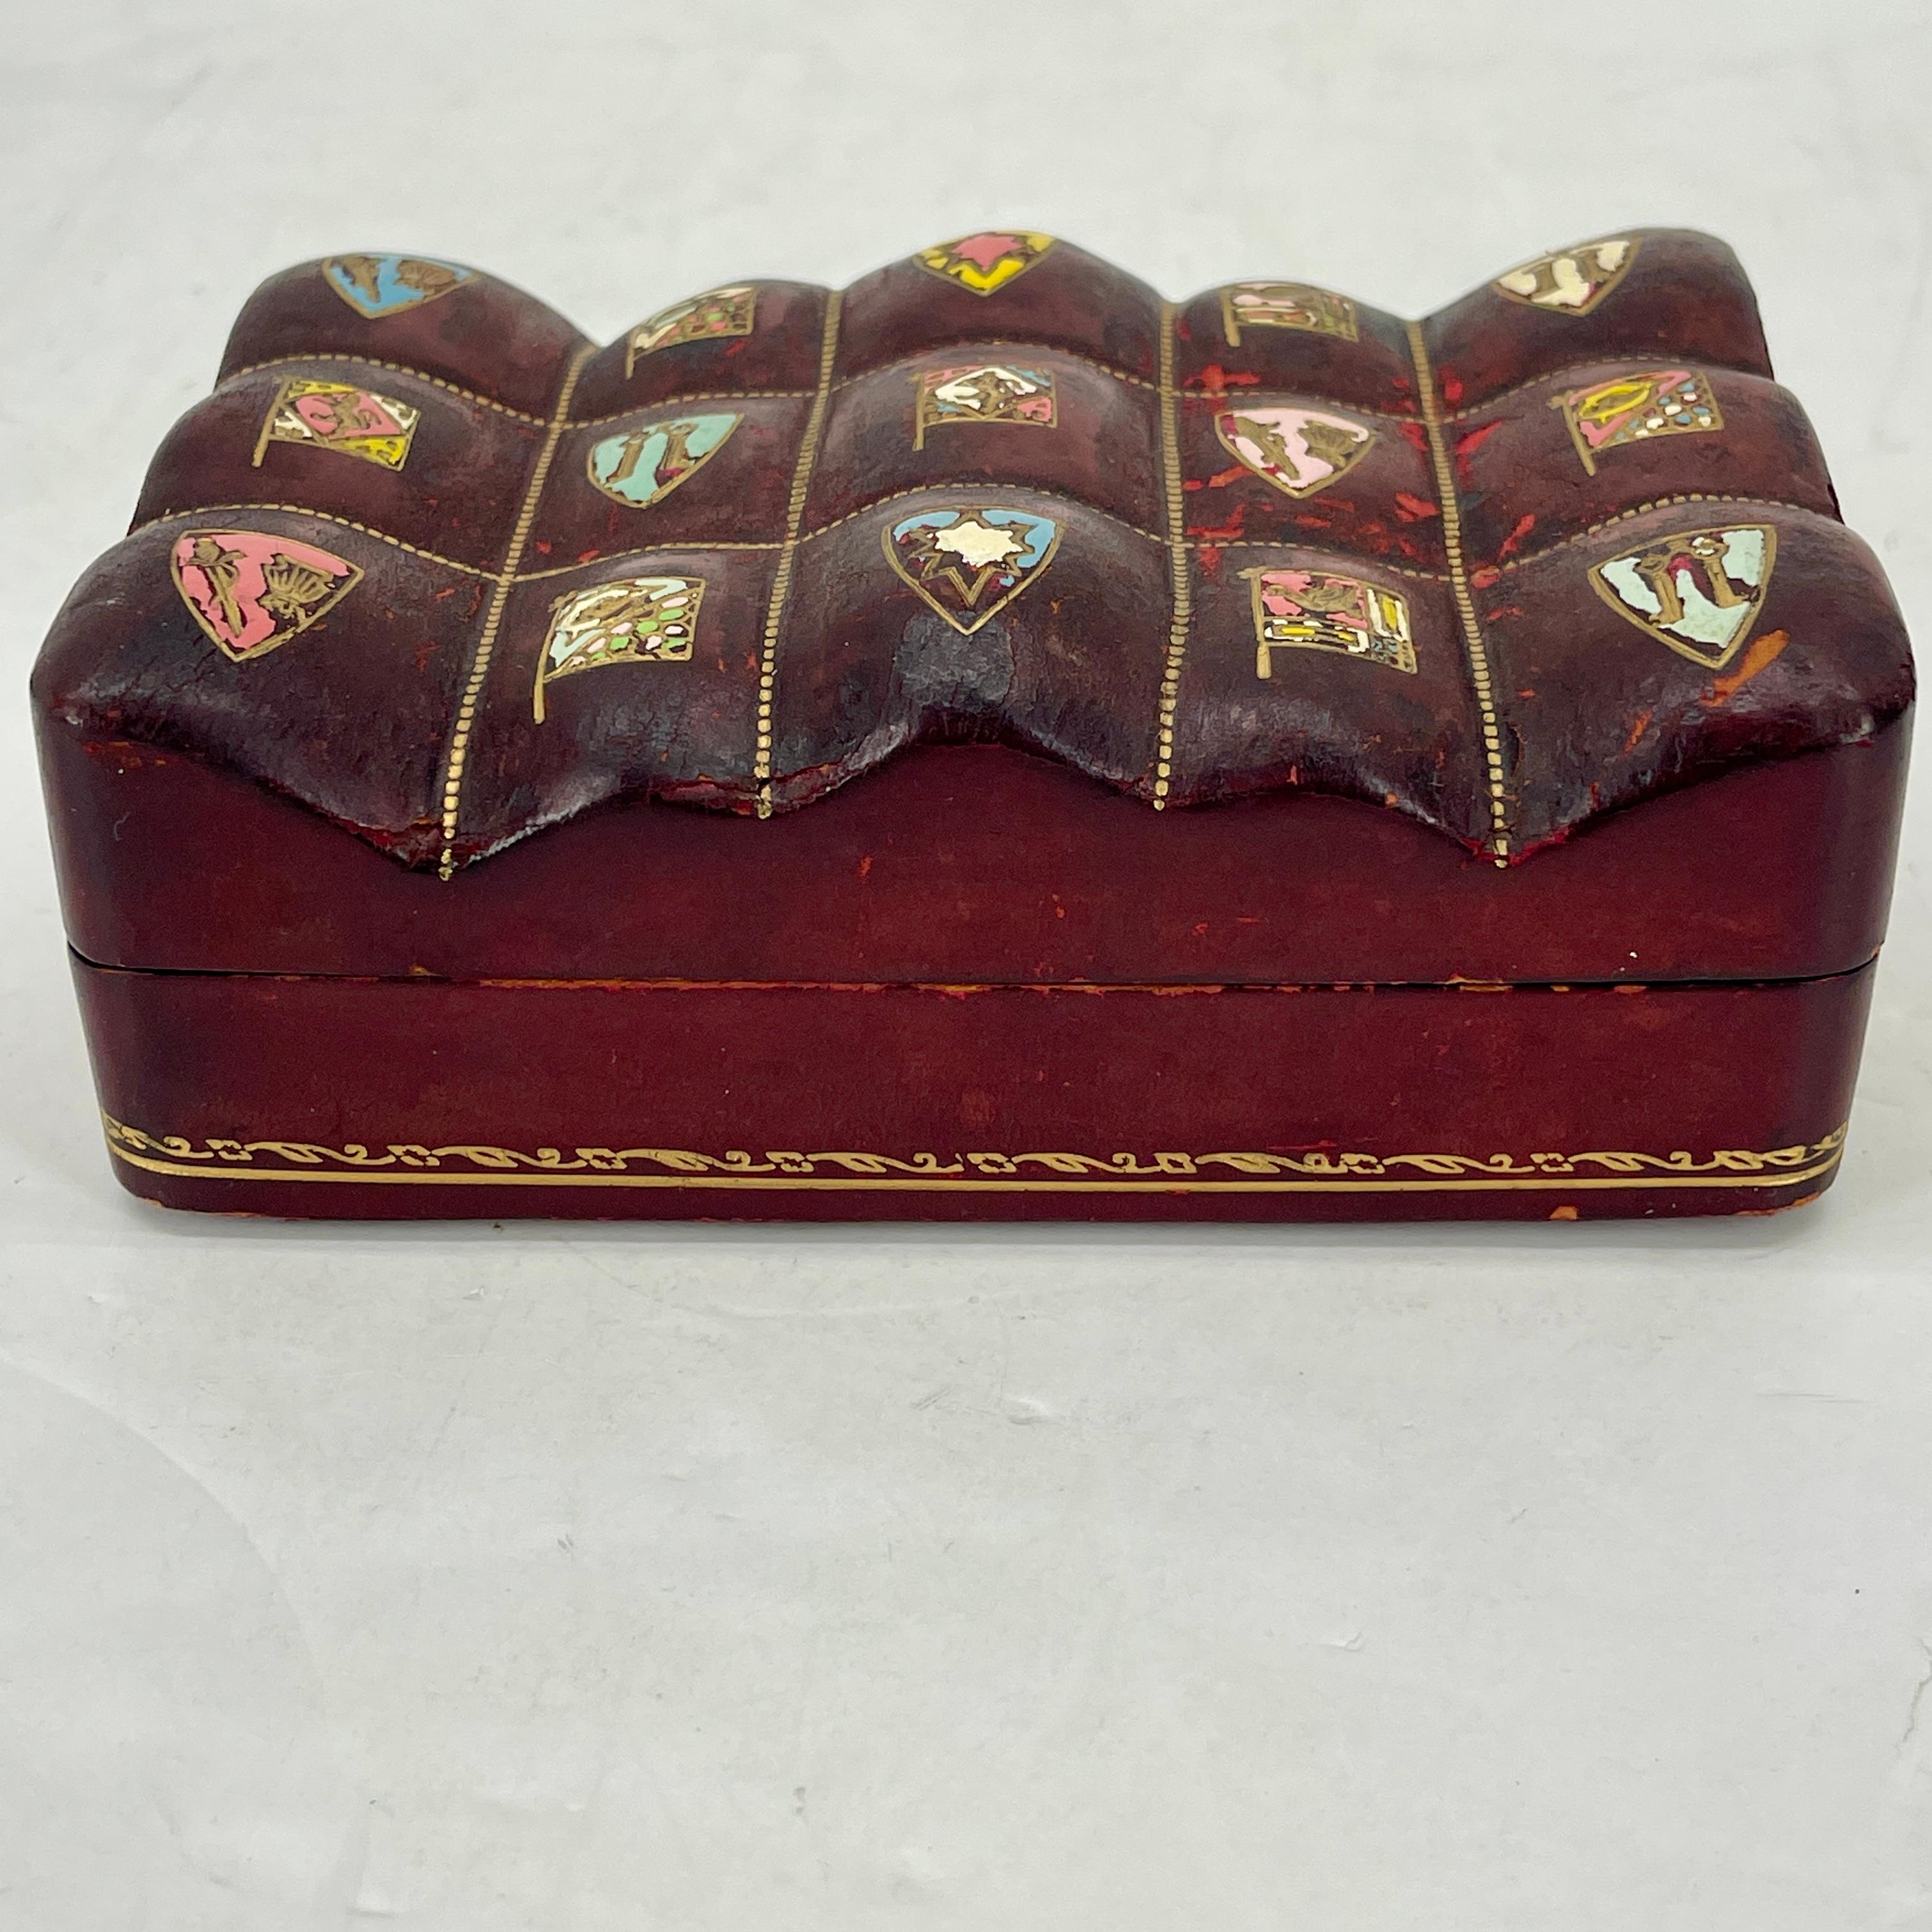 Vintage Italian Jewelry Box in Burgundy Leather, Circa 1950's In Good Condition For Sale In Haddonfield, NJ